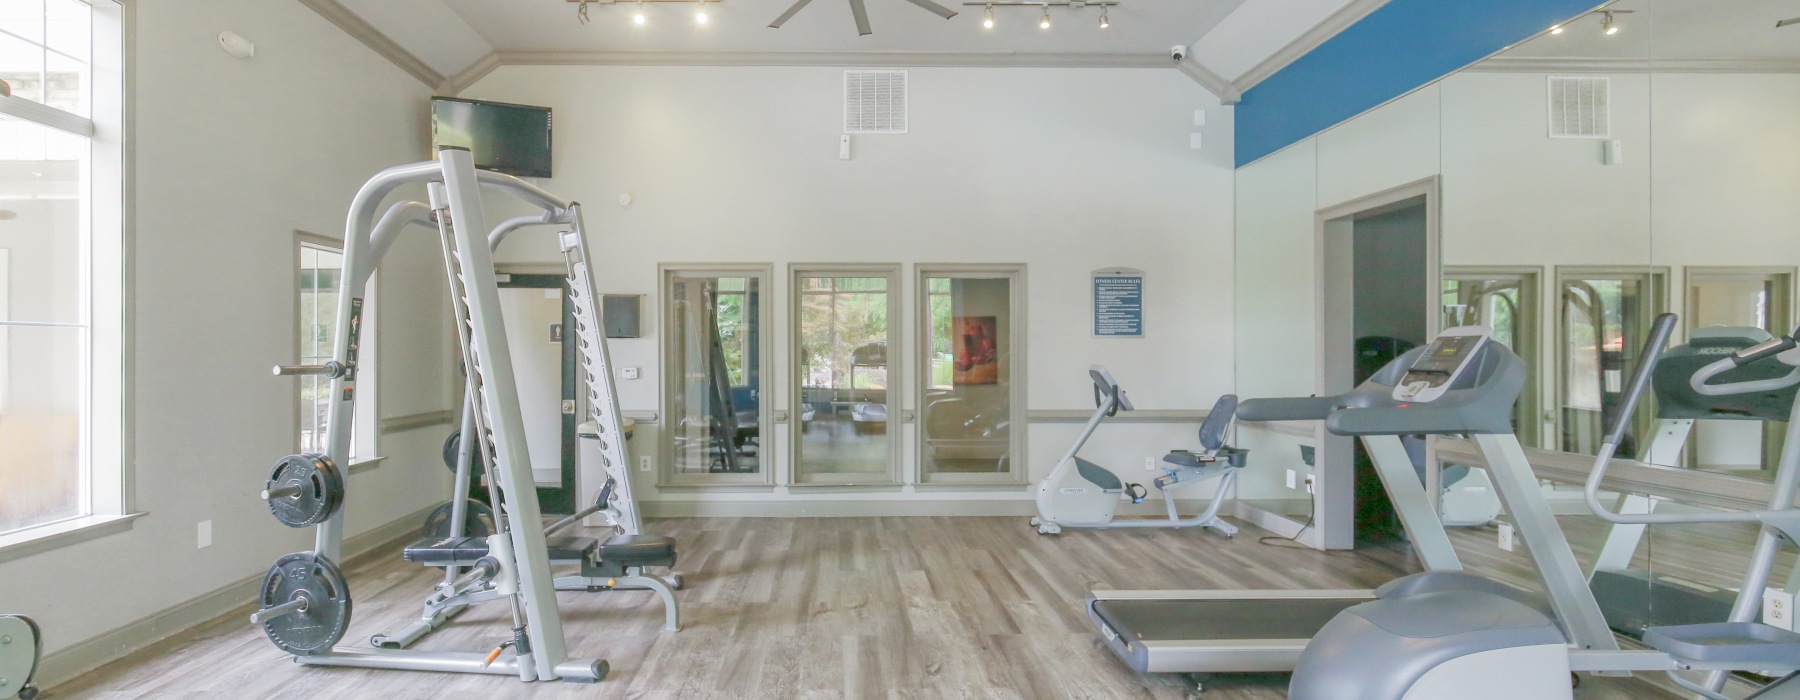 fitness room with workout equipment